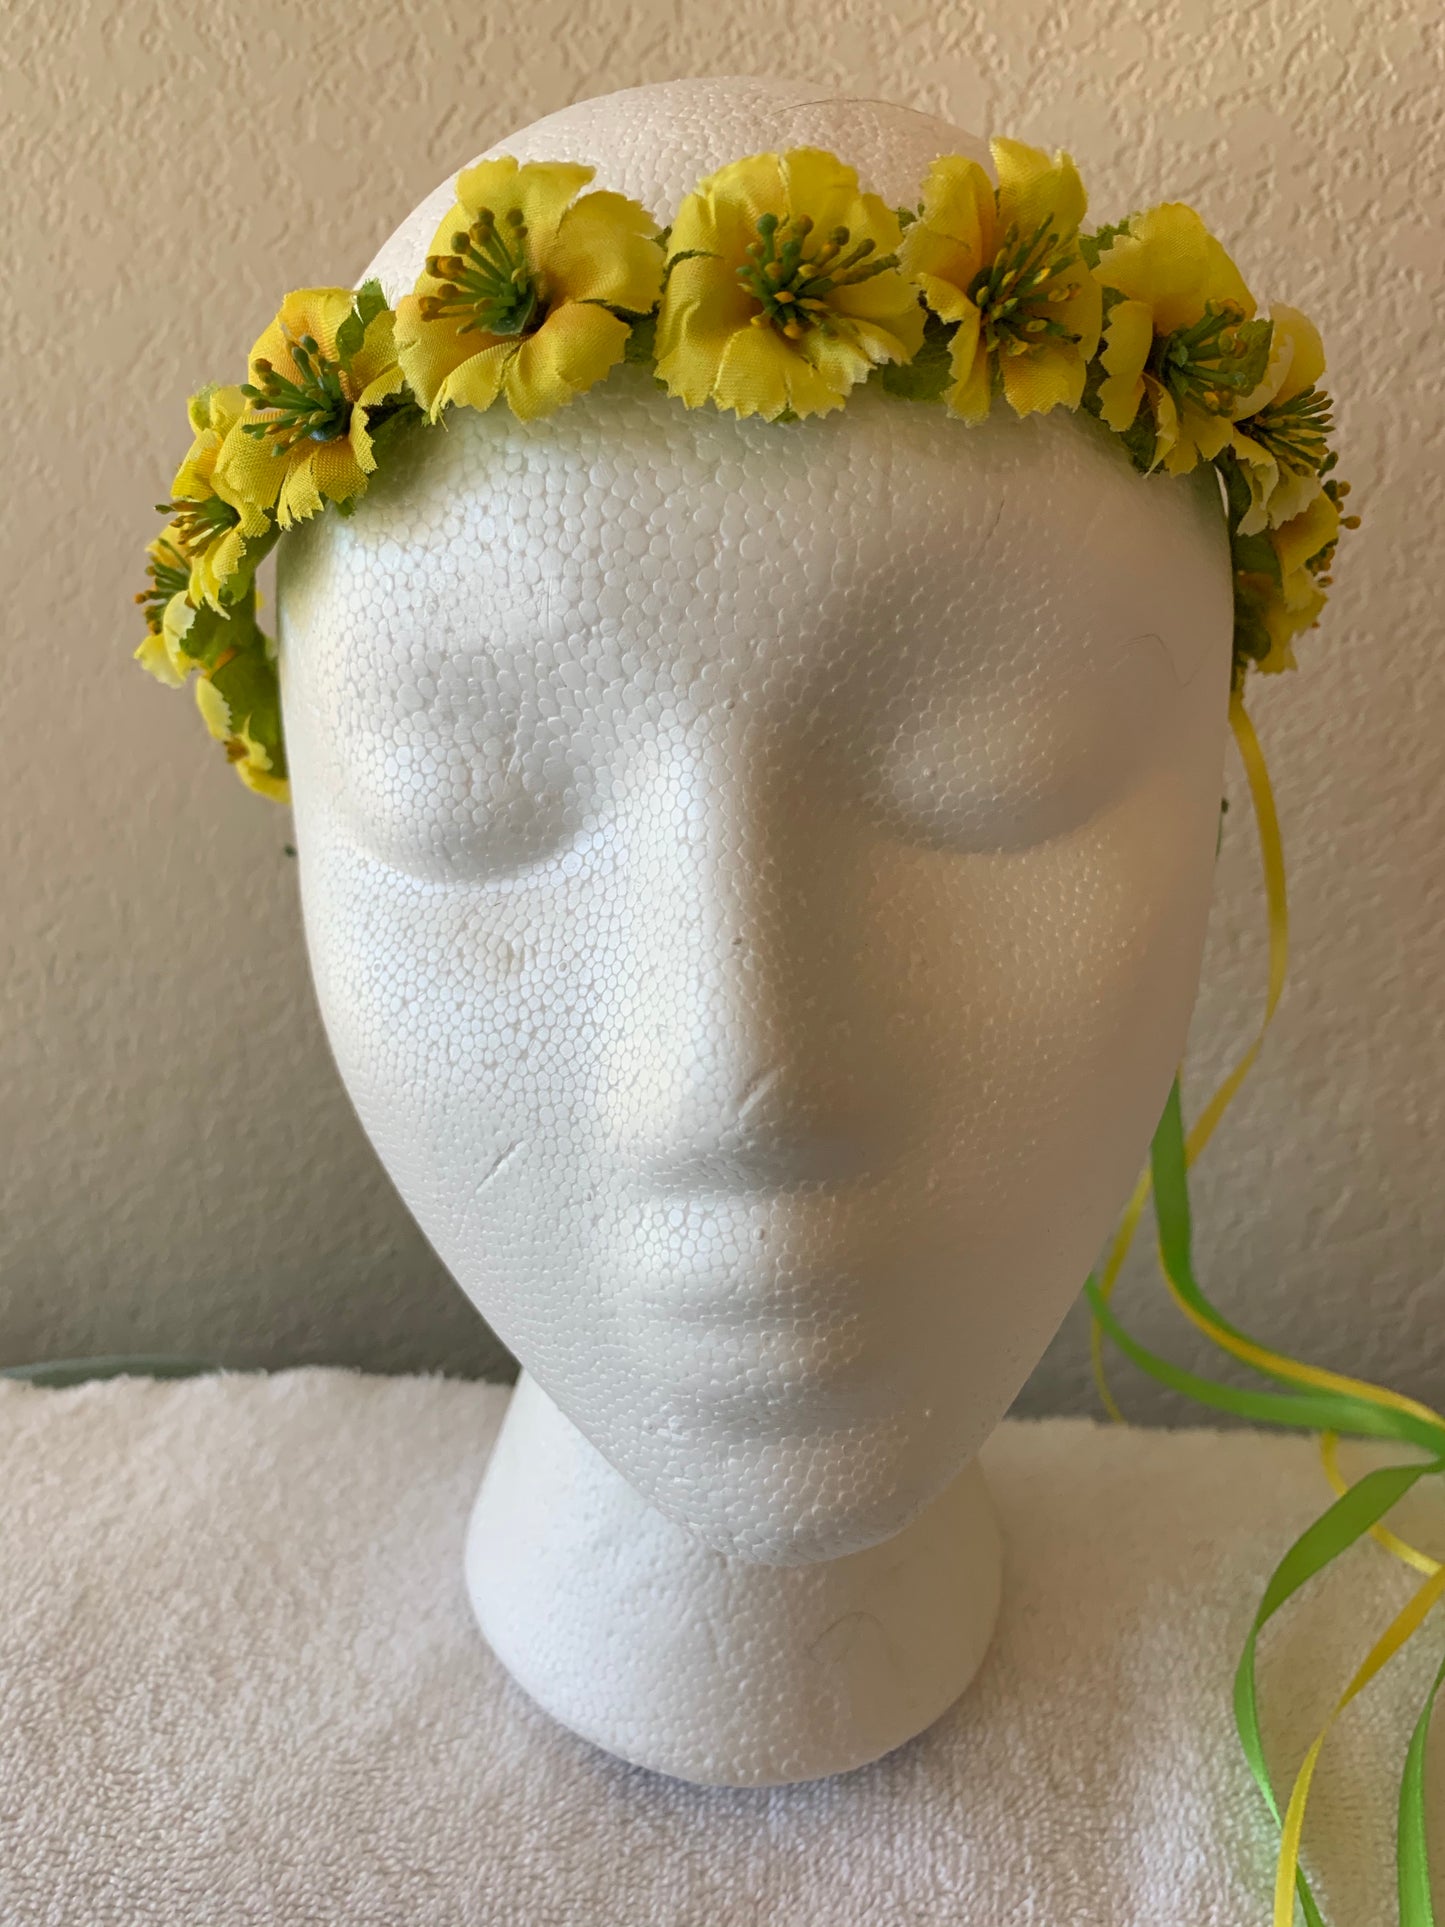 Extra Small Wreath - All Yellow Flowers +